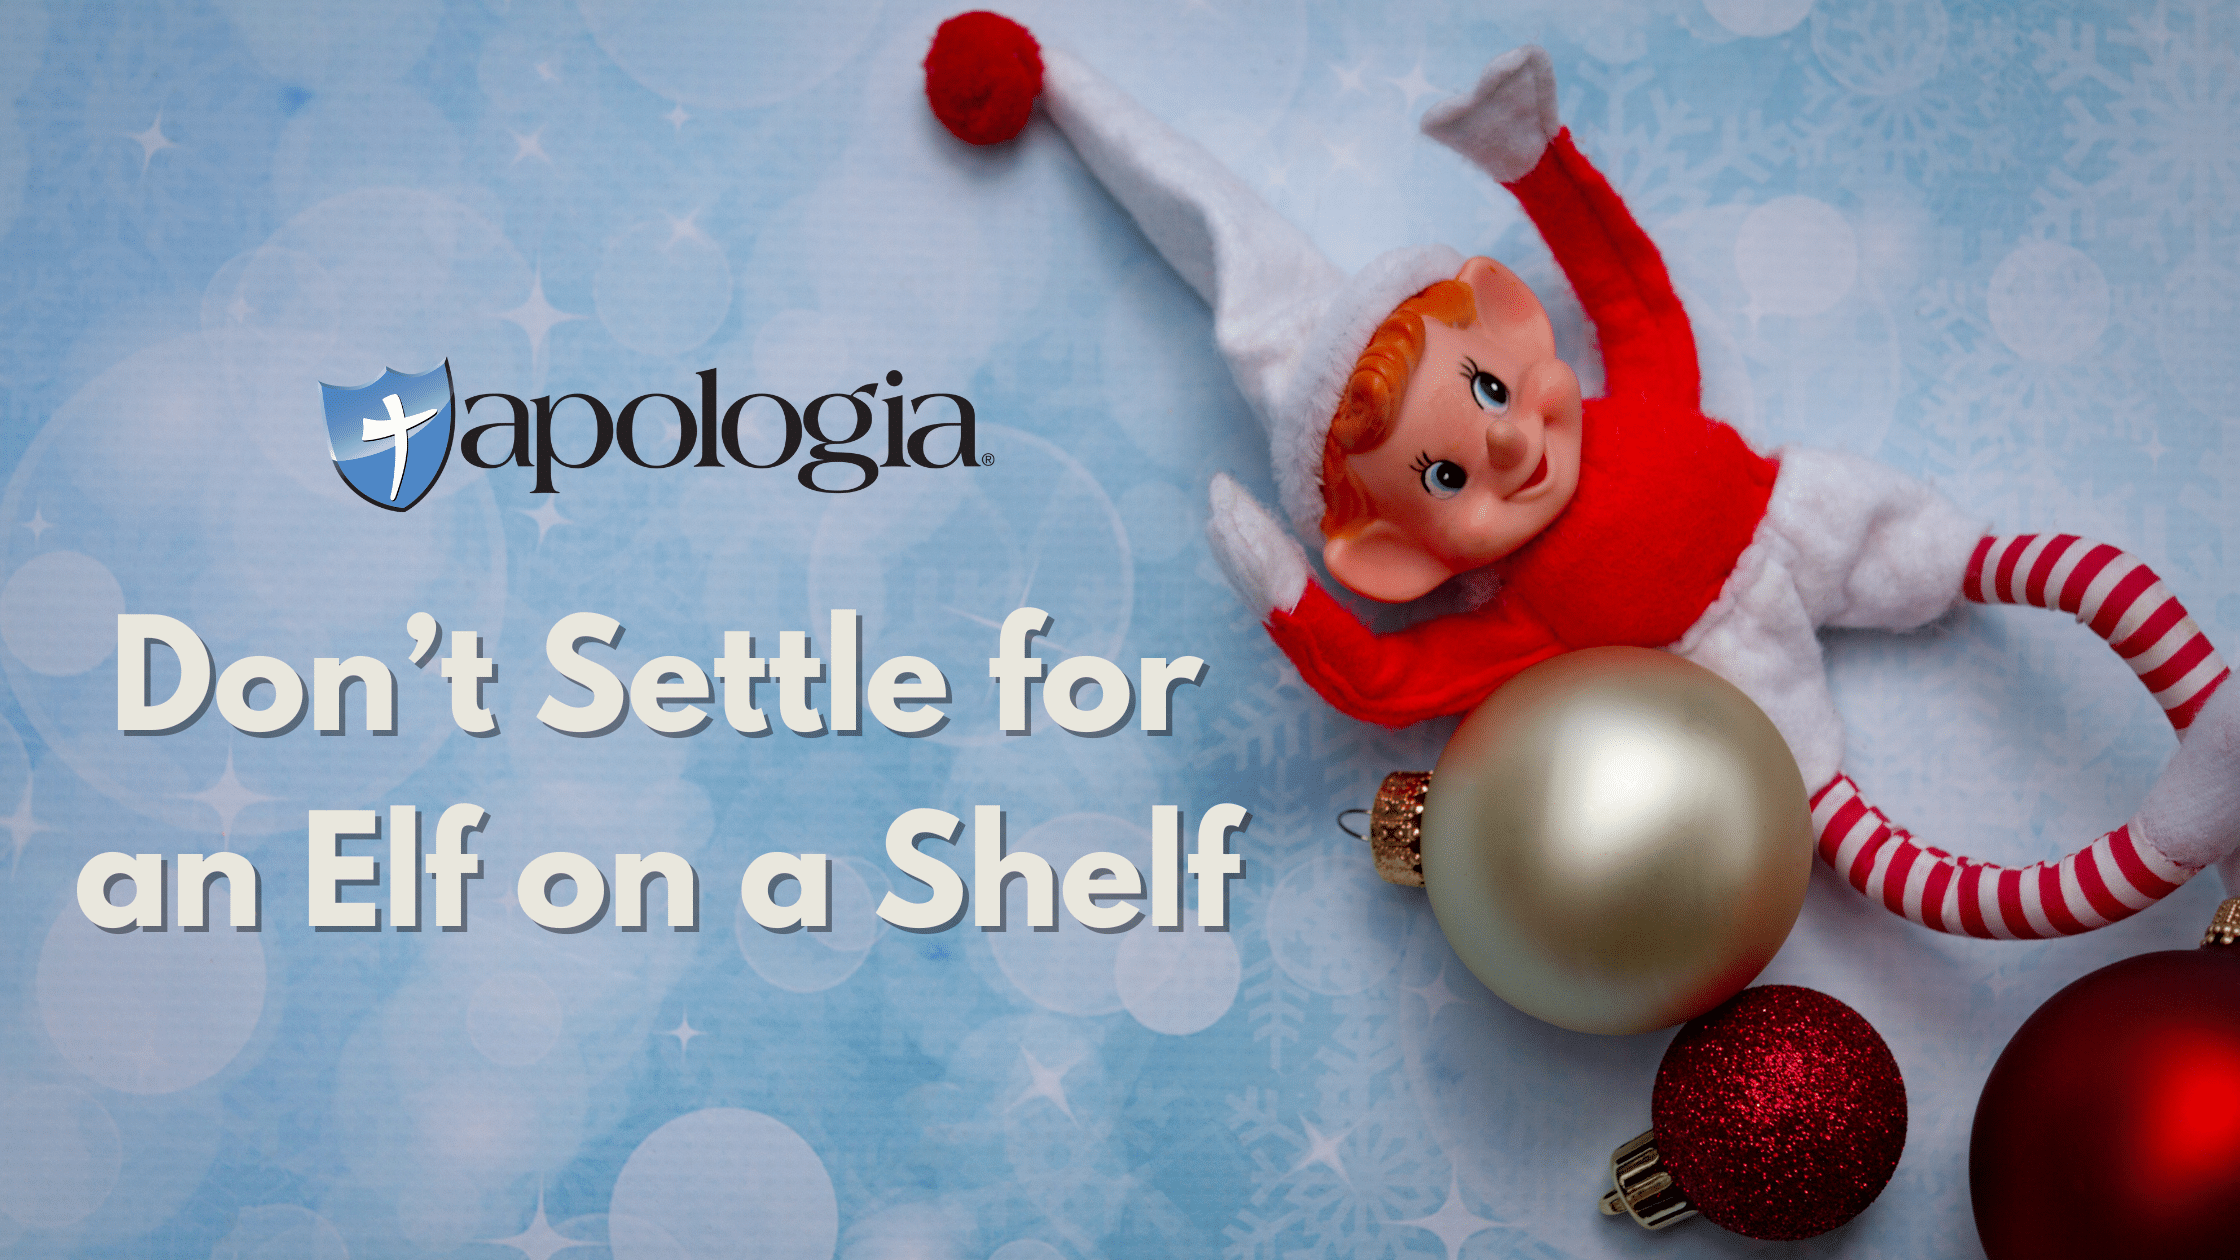 Don’t Settle for an Elf on a Shelf